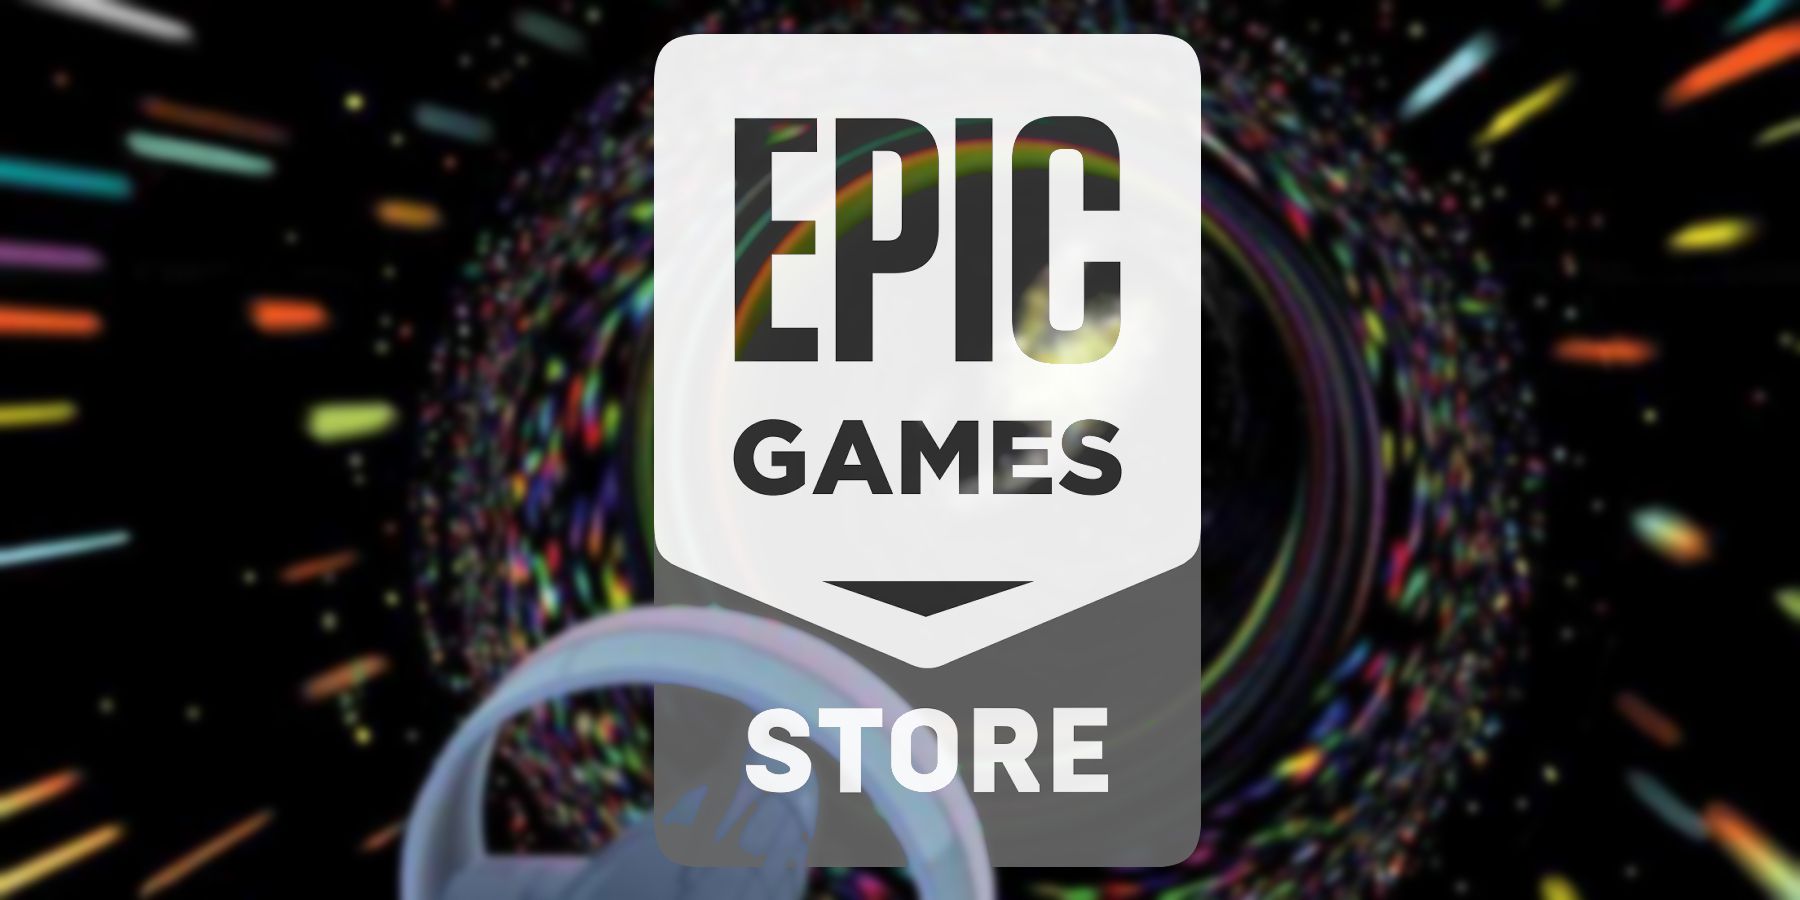 microsoft, the epic games store free games for april 18 are two different blasts from the past